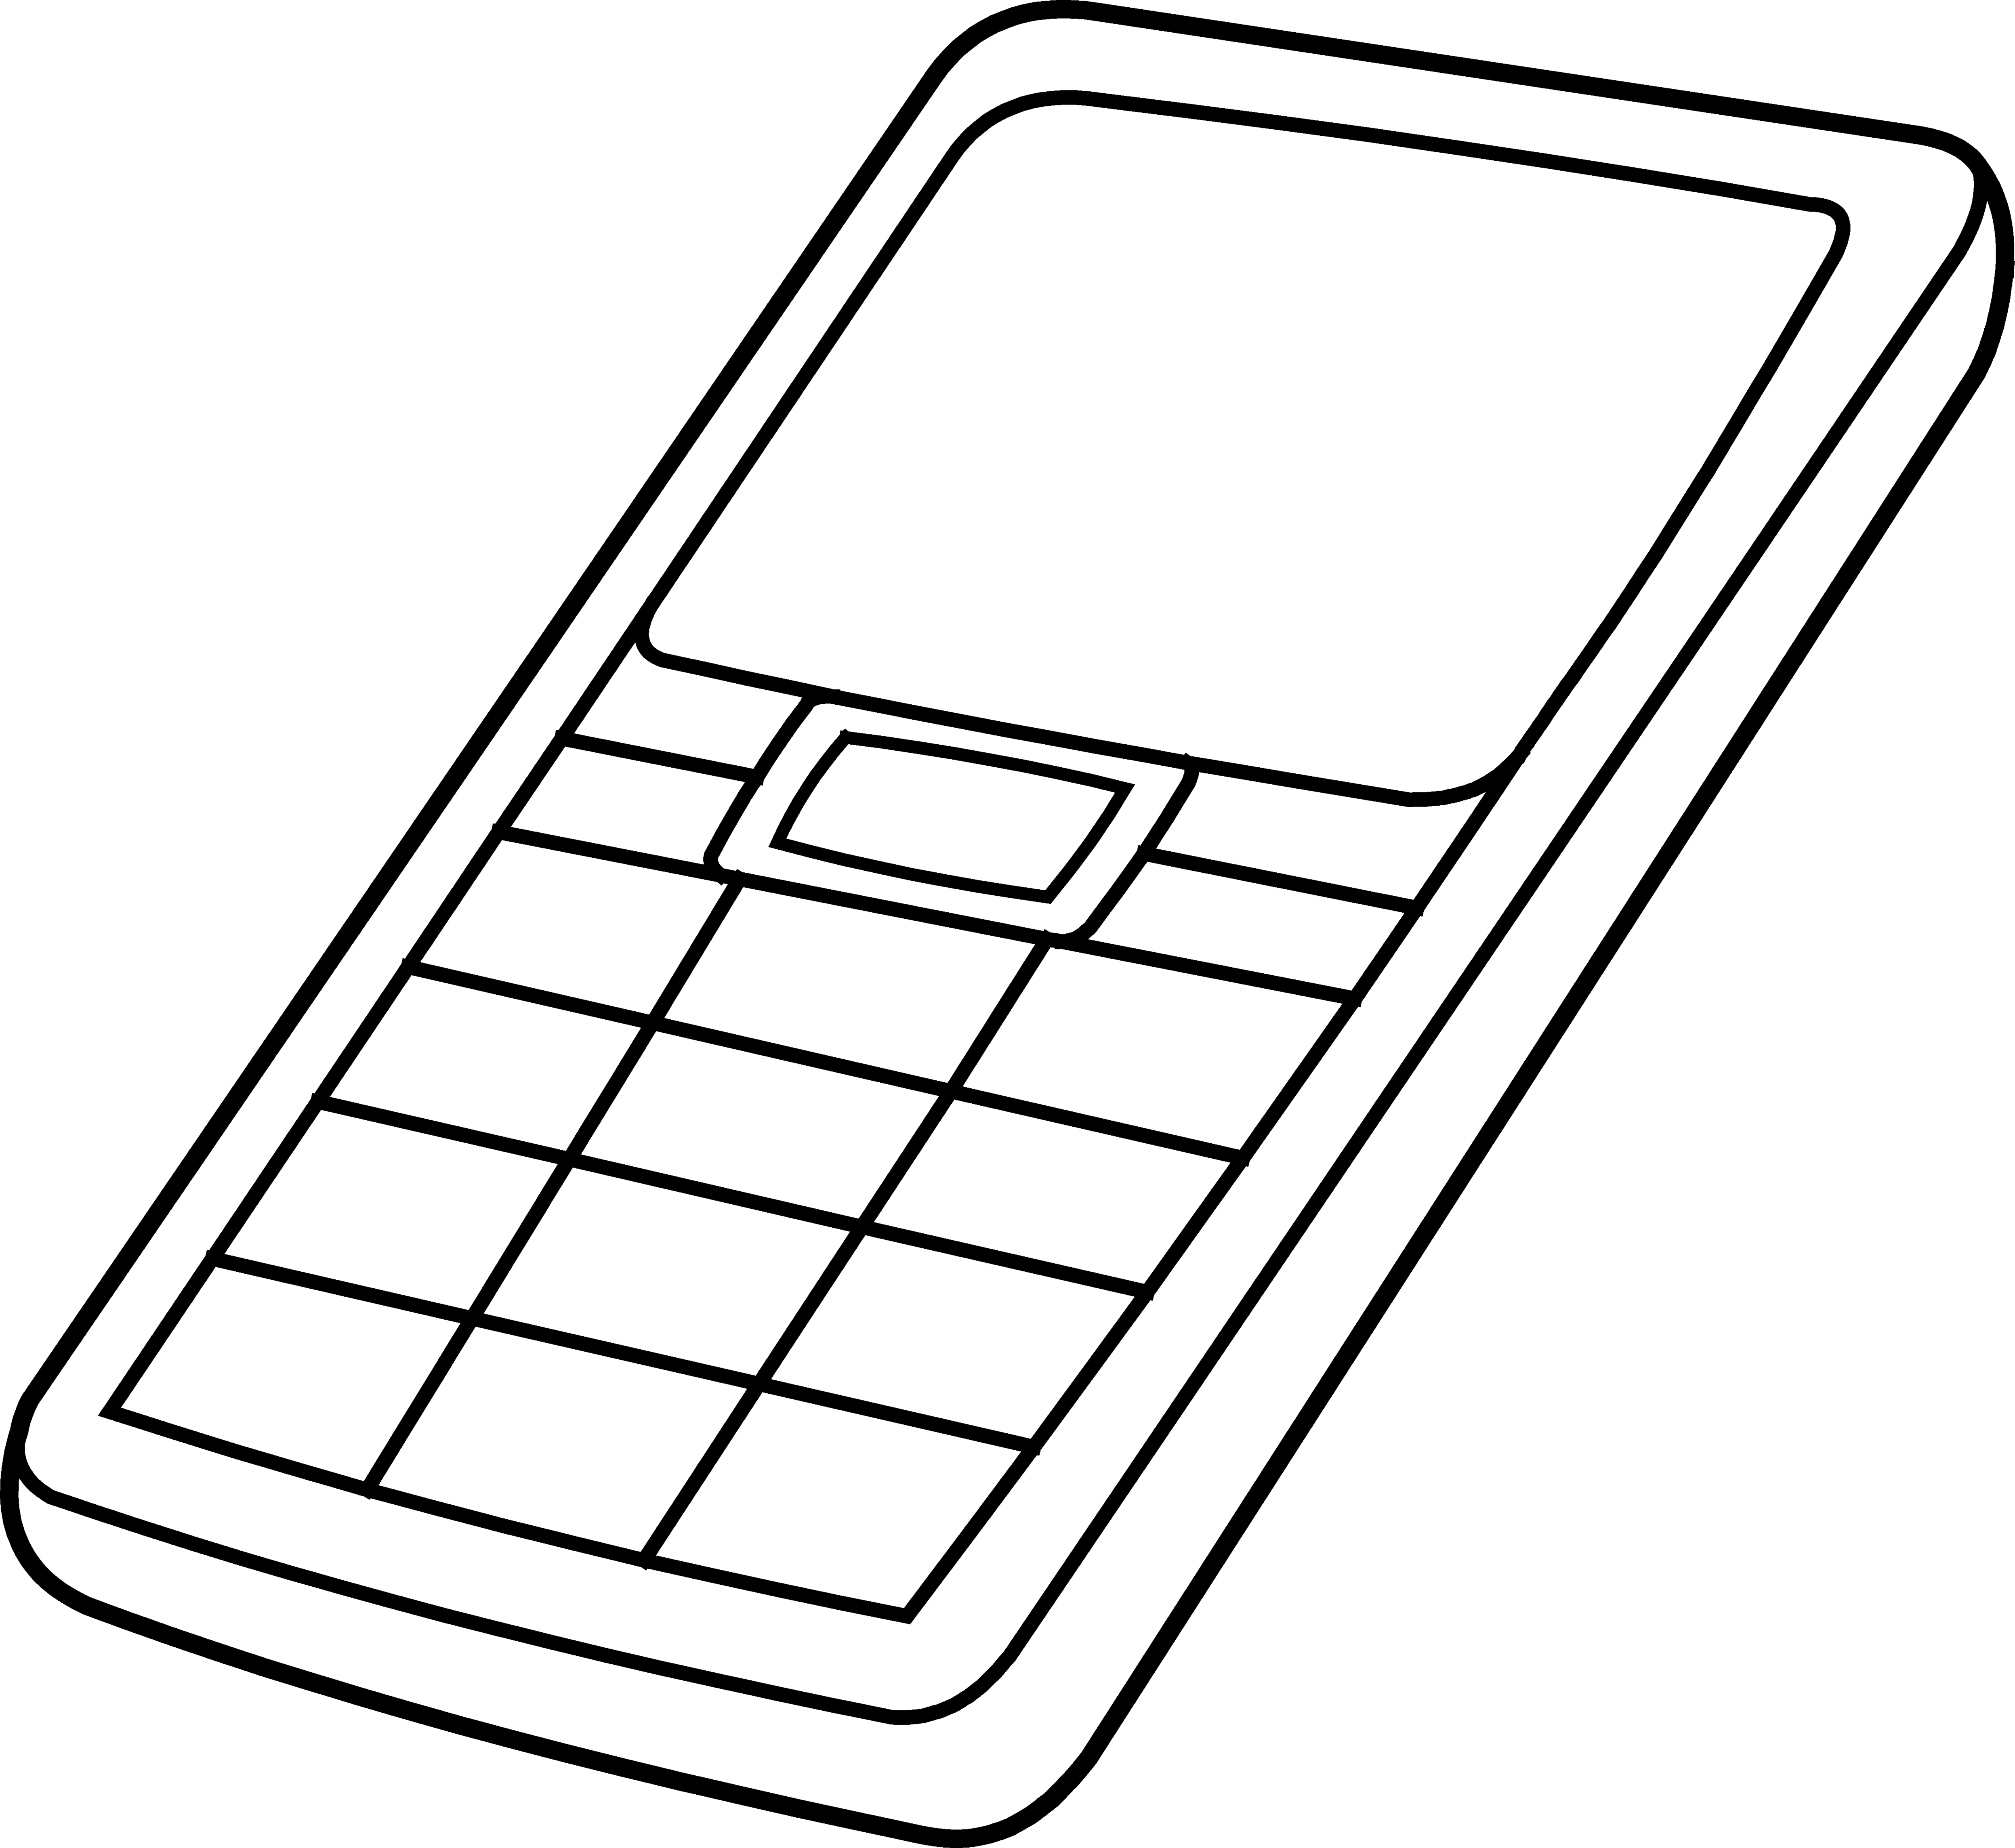 Black and white cell phone clipart